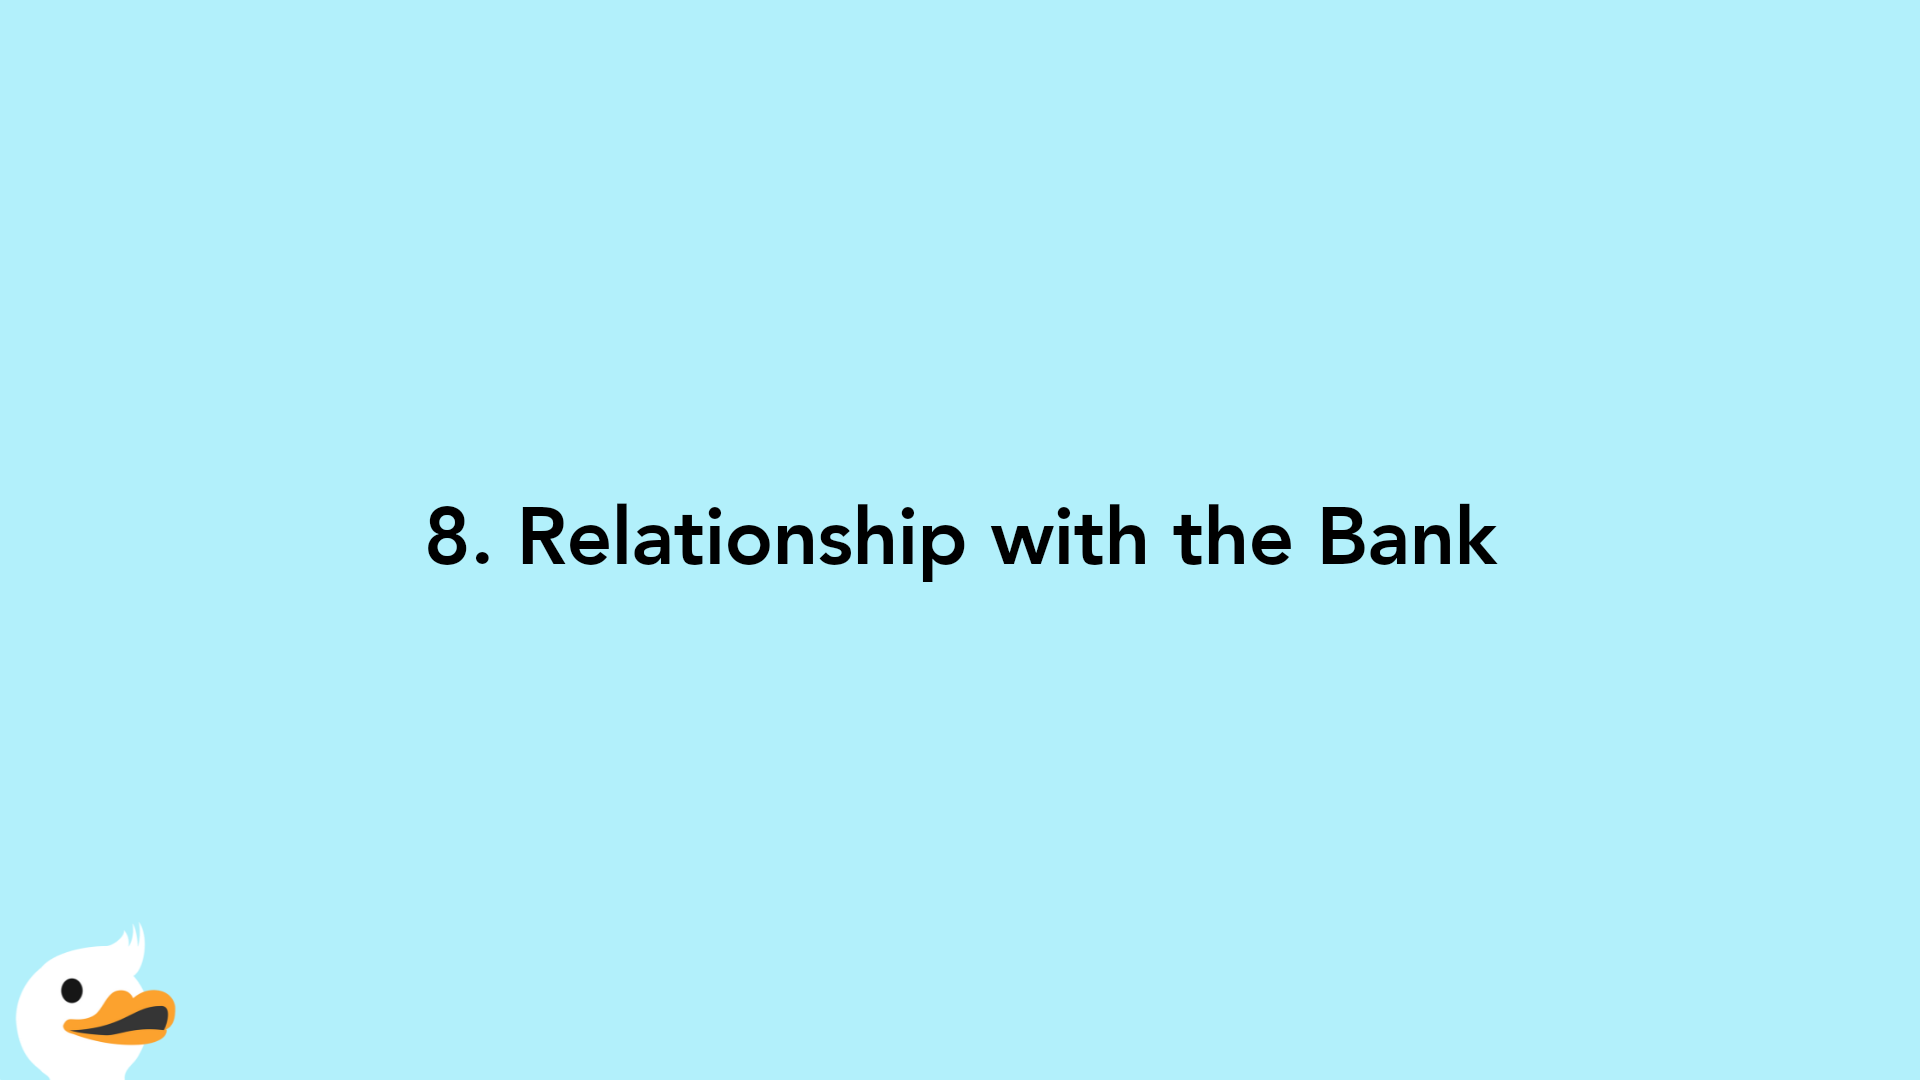 8. Relationship with the Bank